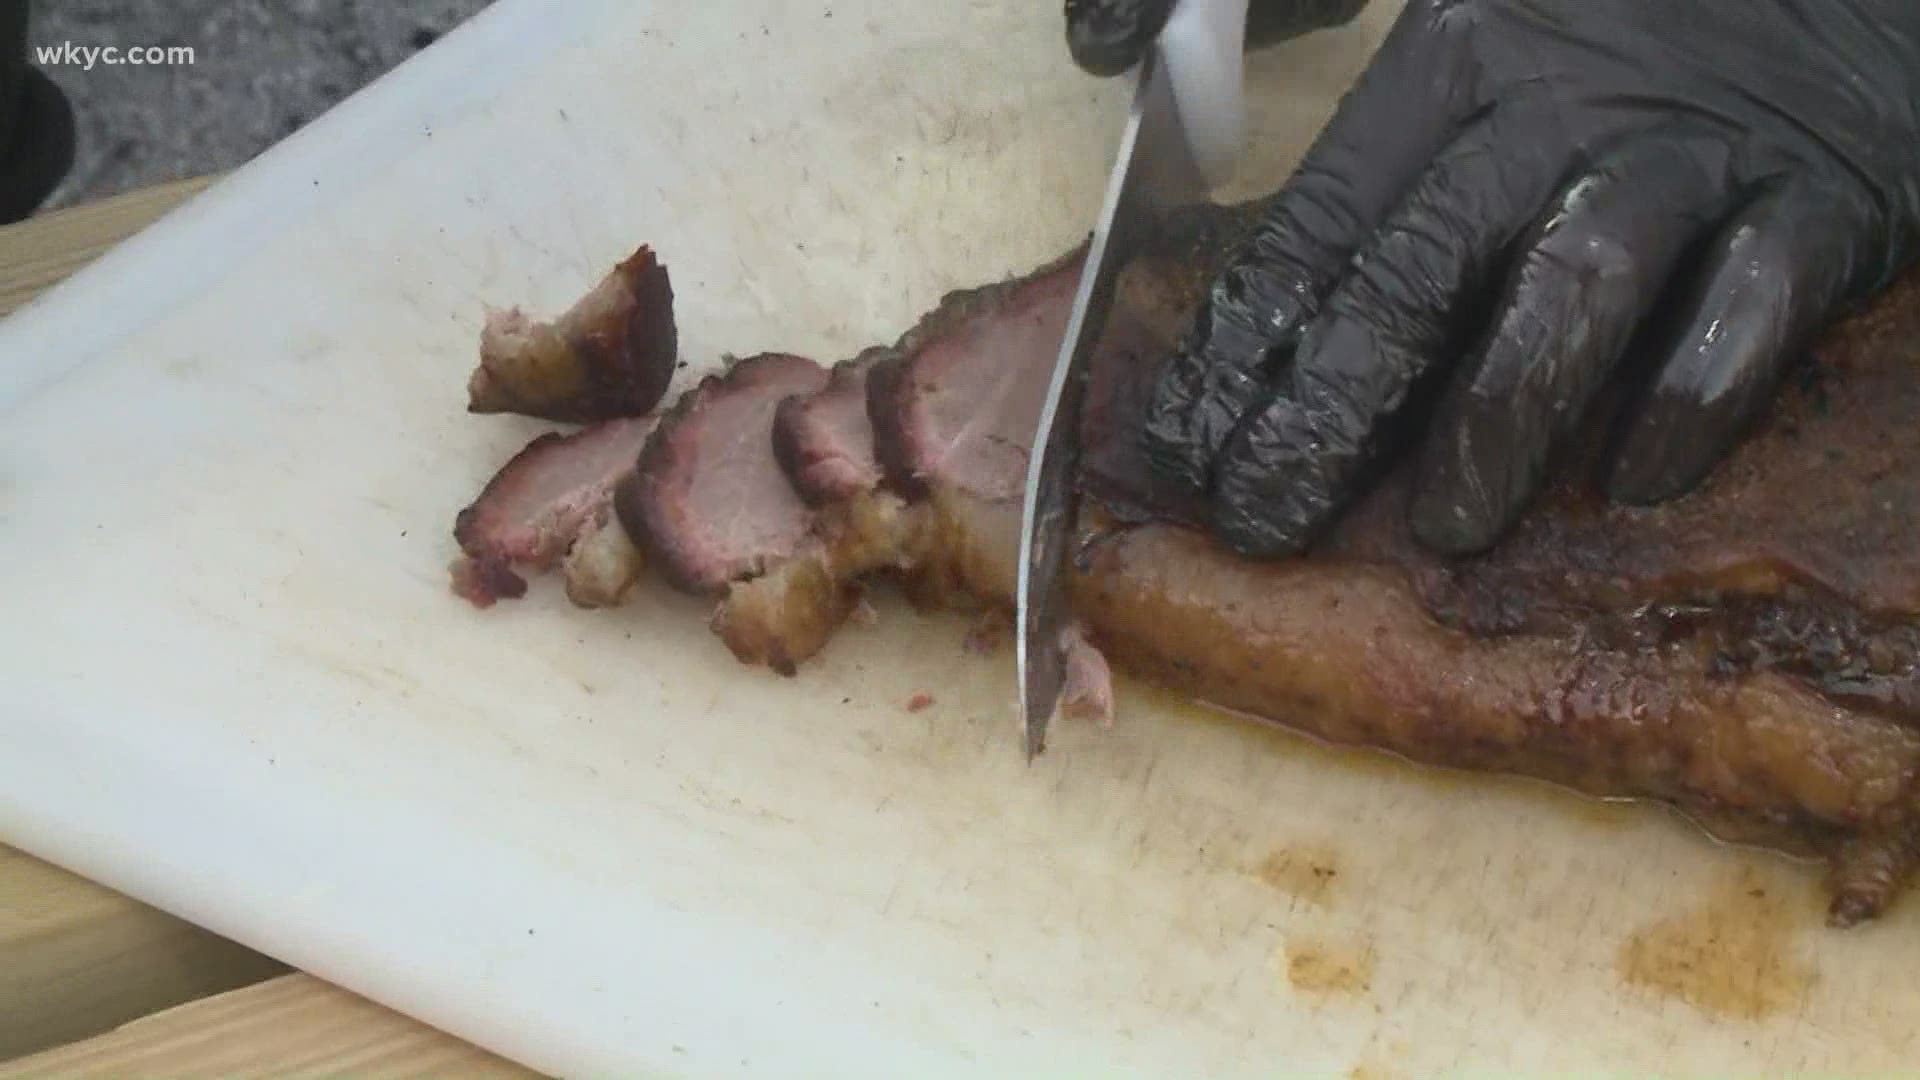 The grill masters from the Smokin' Rock N' Roll food truck share their expertise on how to cook the perfect brisket.